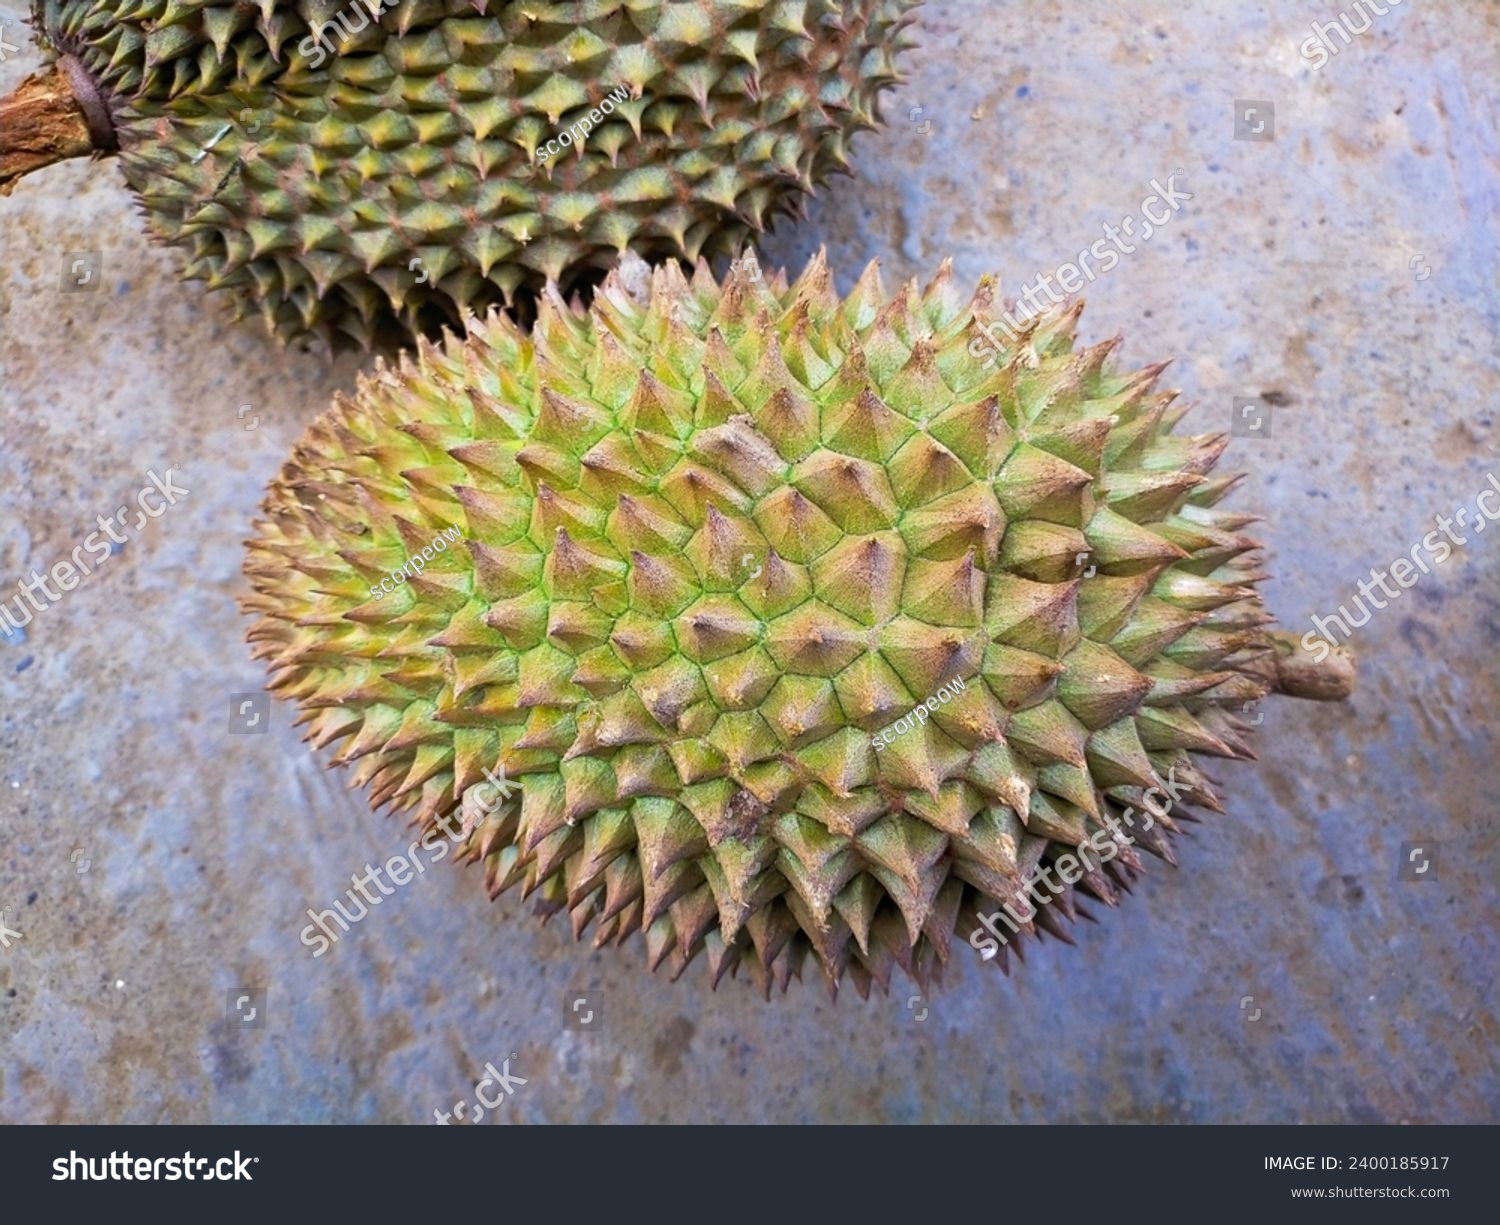 Close up A collection of green durians at the durian market, local Indonesian durians are sold at the market during durian season #2400185917